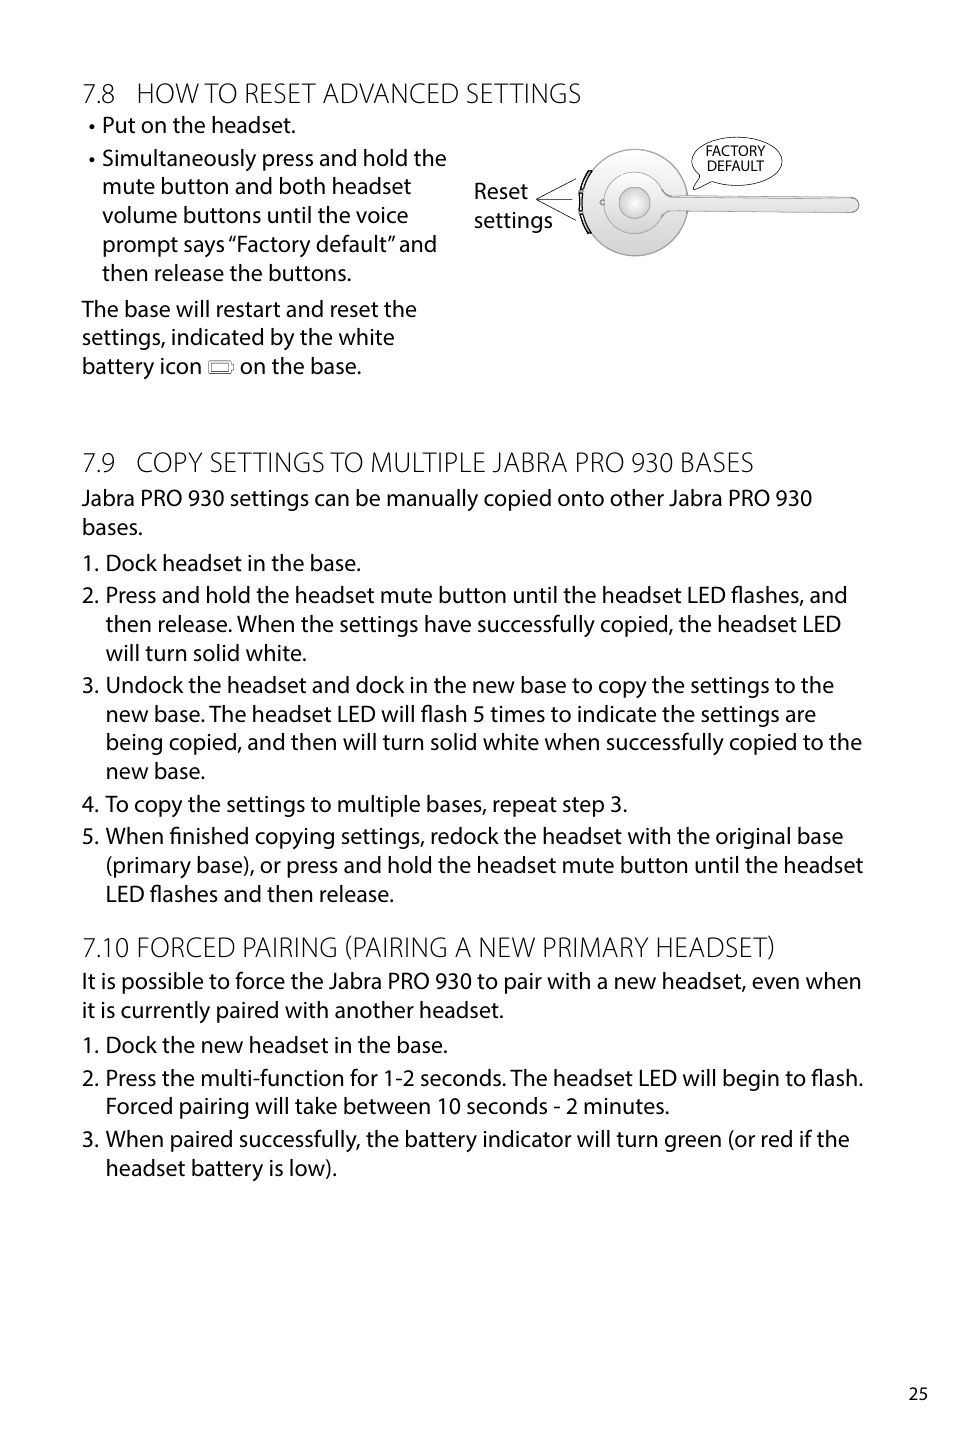 8 how to reset advanced settings, 9 copy settings to multiple jabra pro 930  bases, 10 forced pairing (pairing a new primary headset) | Jabra PRO 930  User Manual User Manual | Page 25 / 33 | Original mode